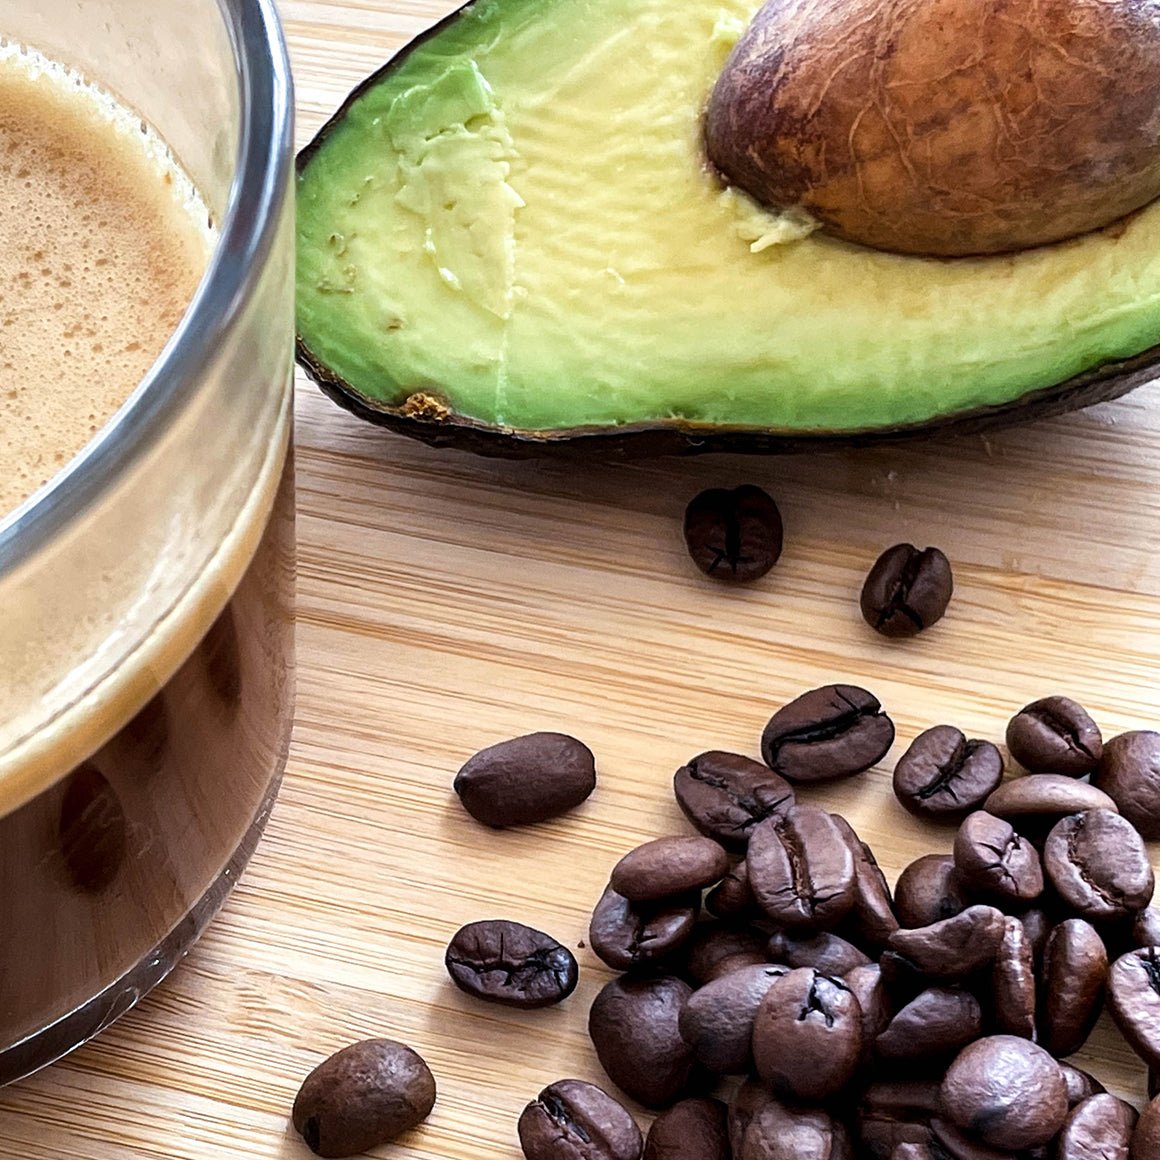 Pair flavored coffee with avocado to meet fat requirements on a keto diet